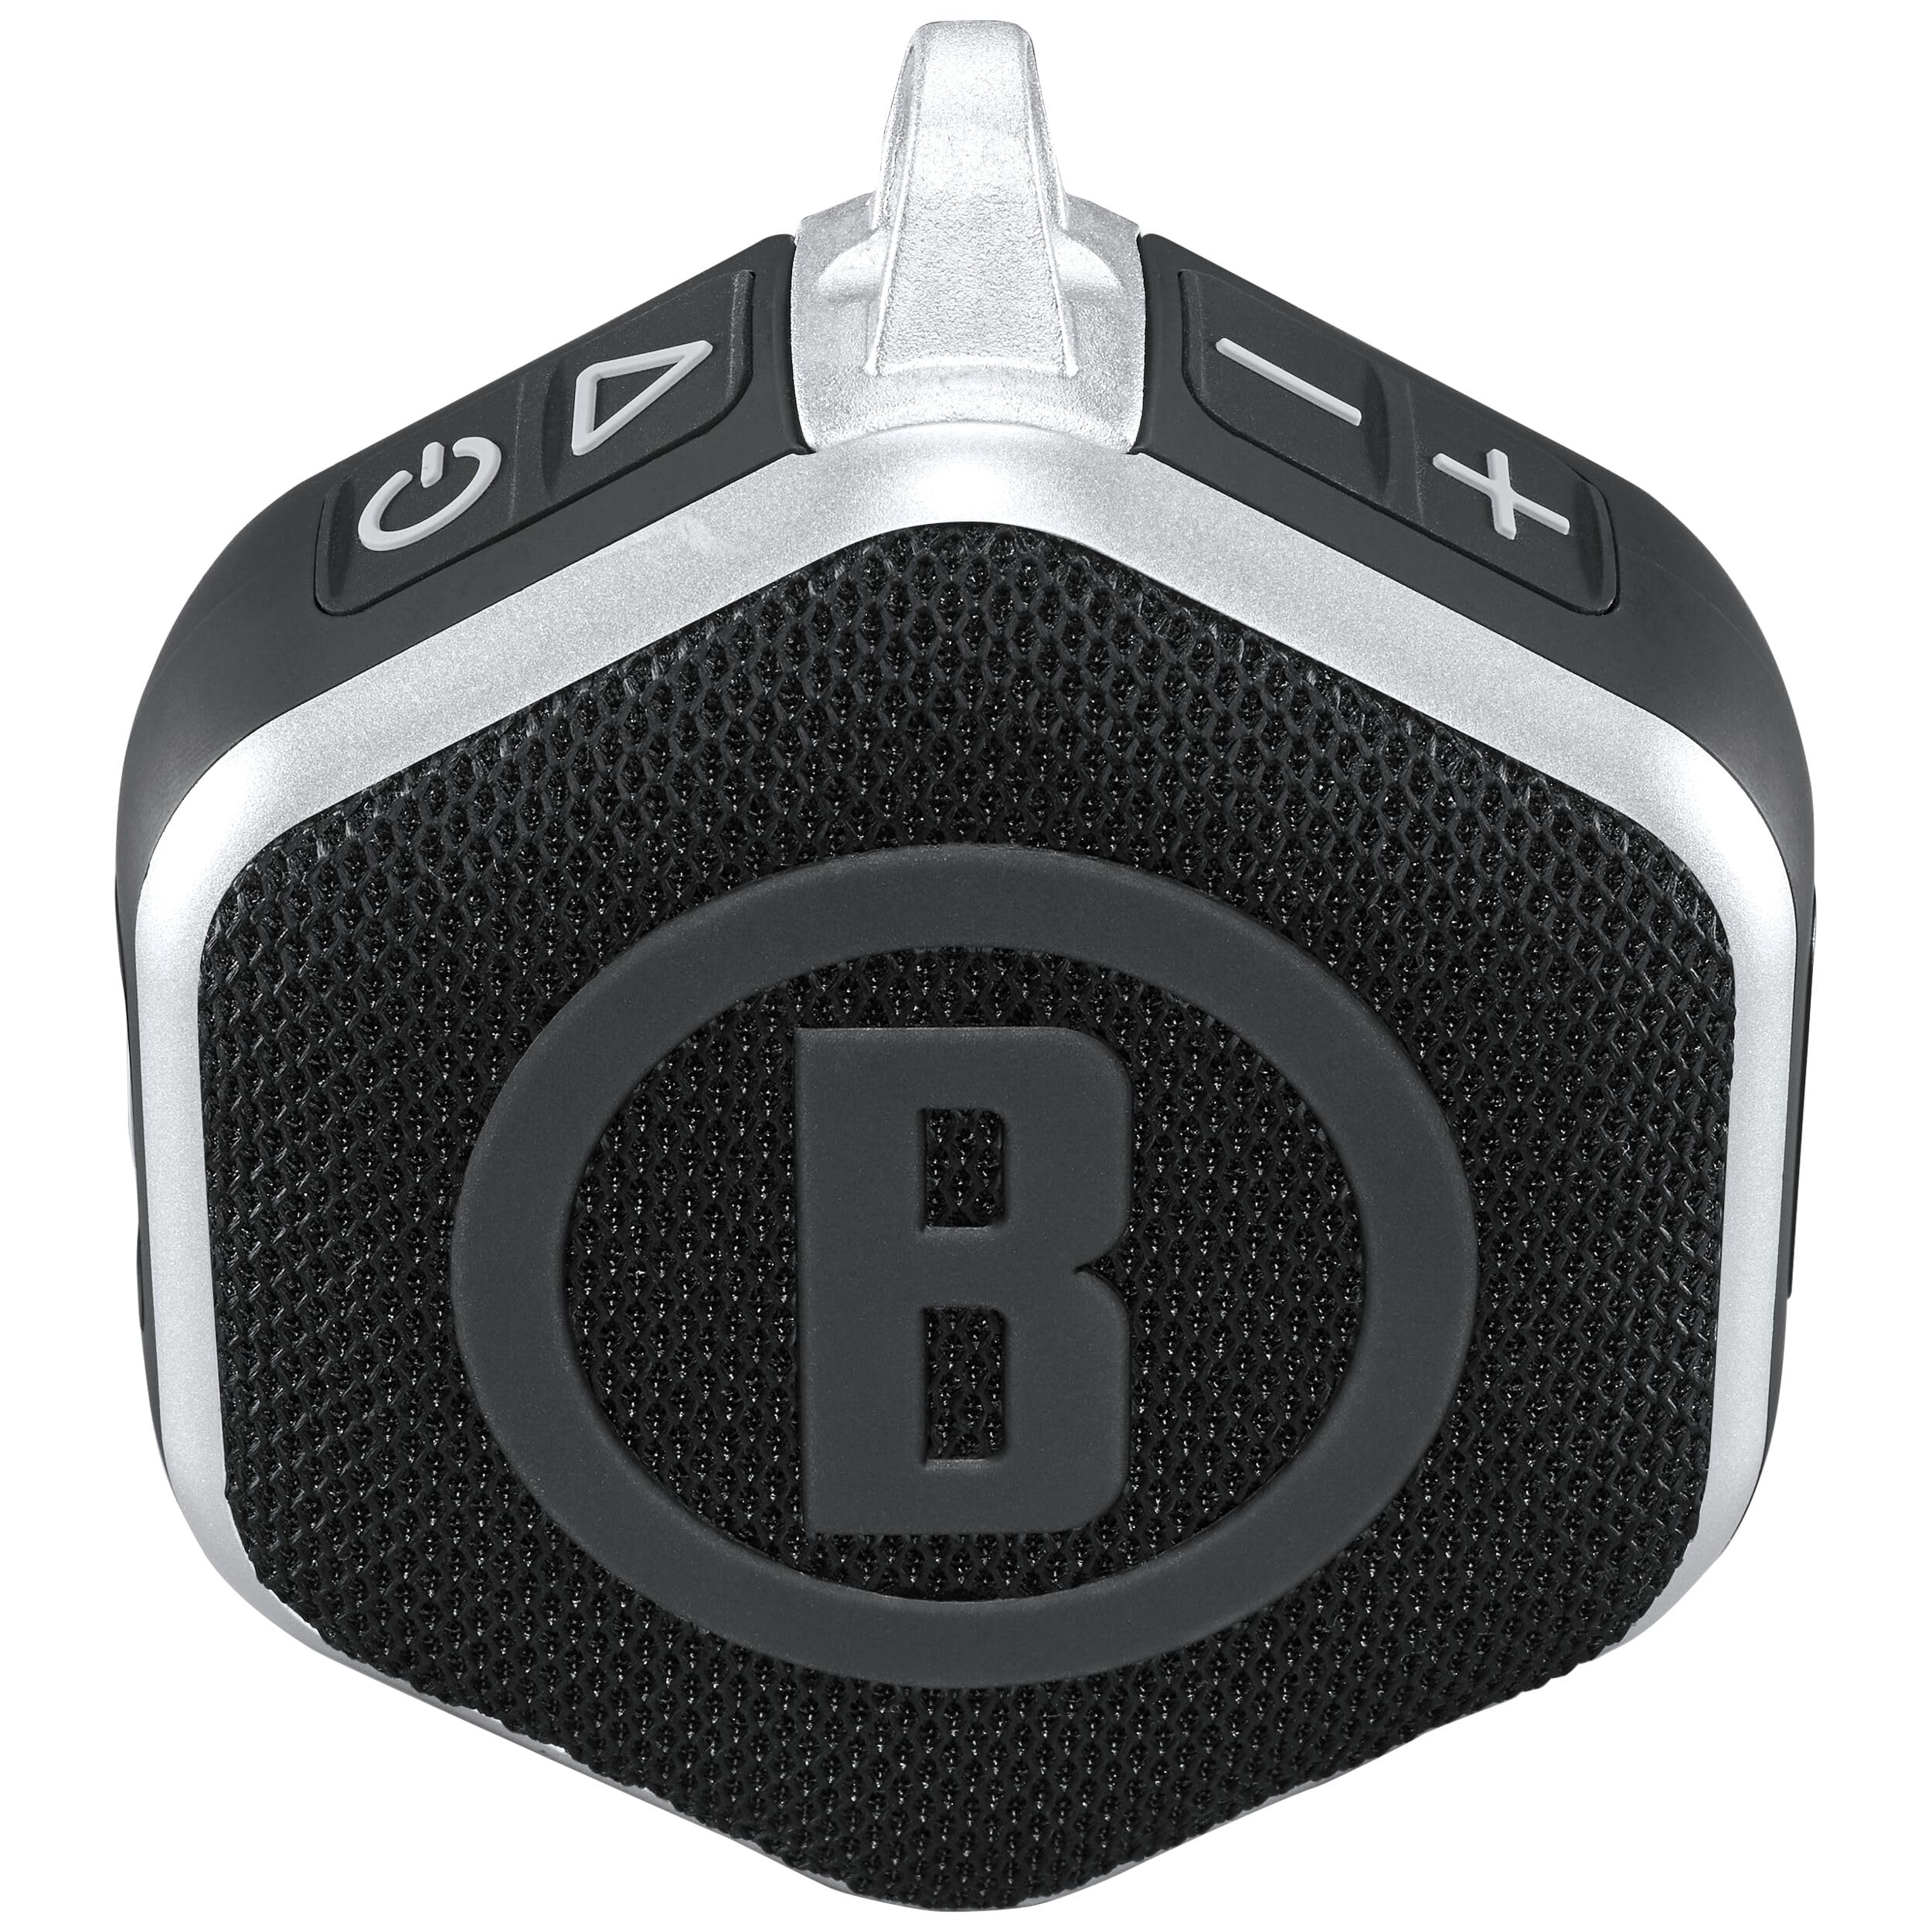 Bushnell Golf Wingman Mini GPS Speaker - Audible & Accurate Distances, Multiple Mounting Options for Cart or Walking (Black/Silver)